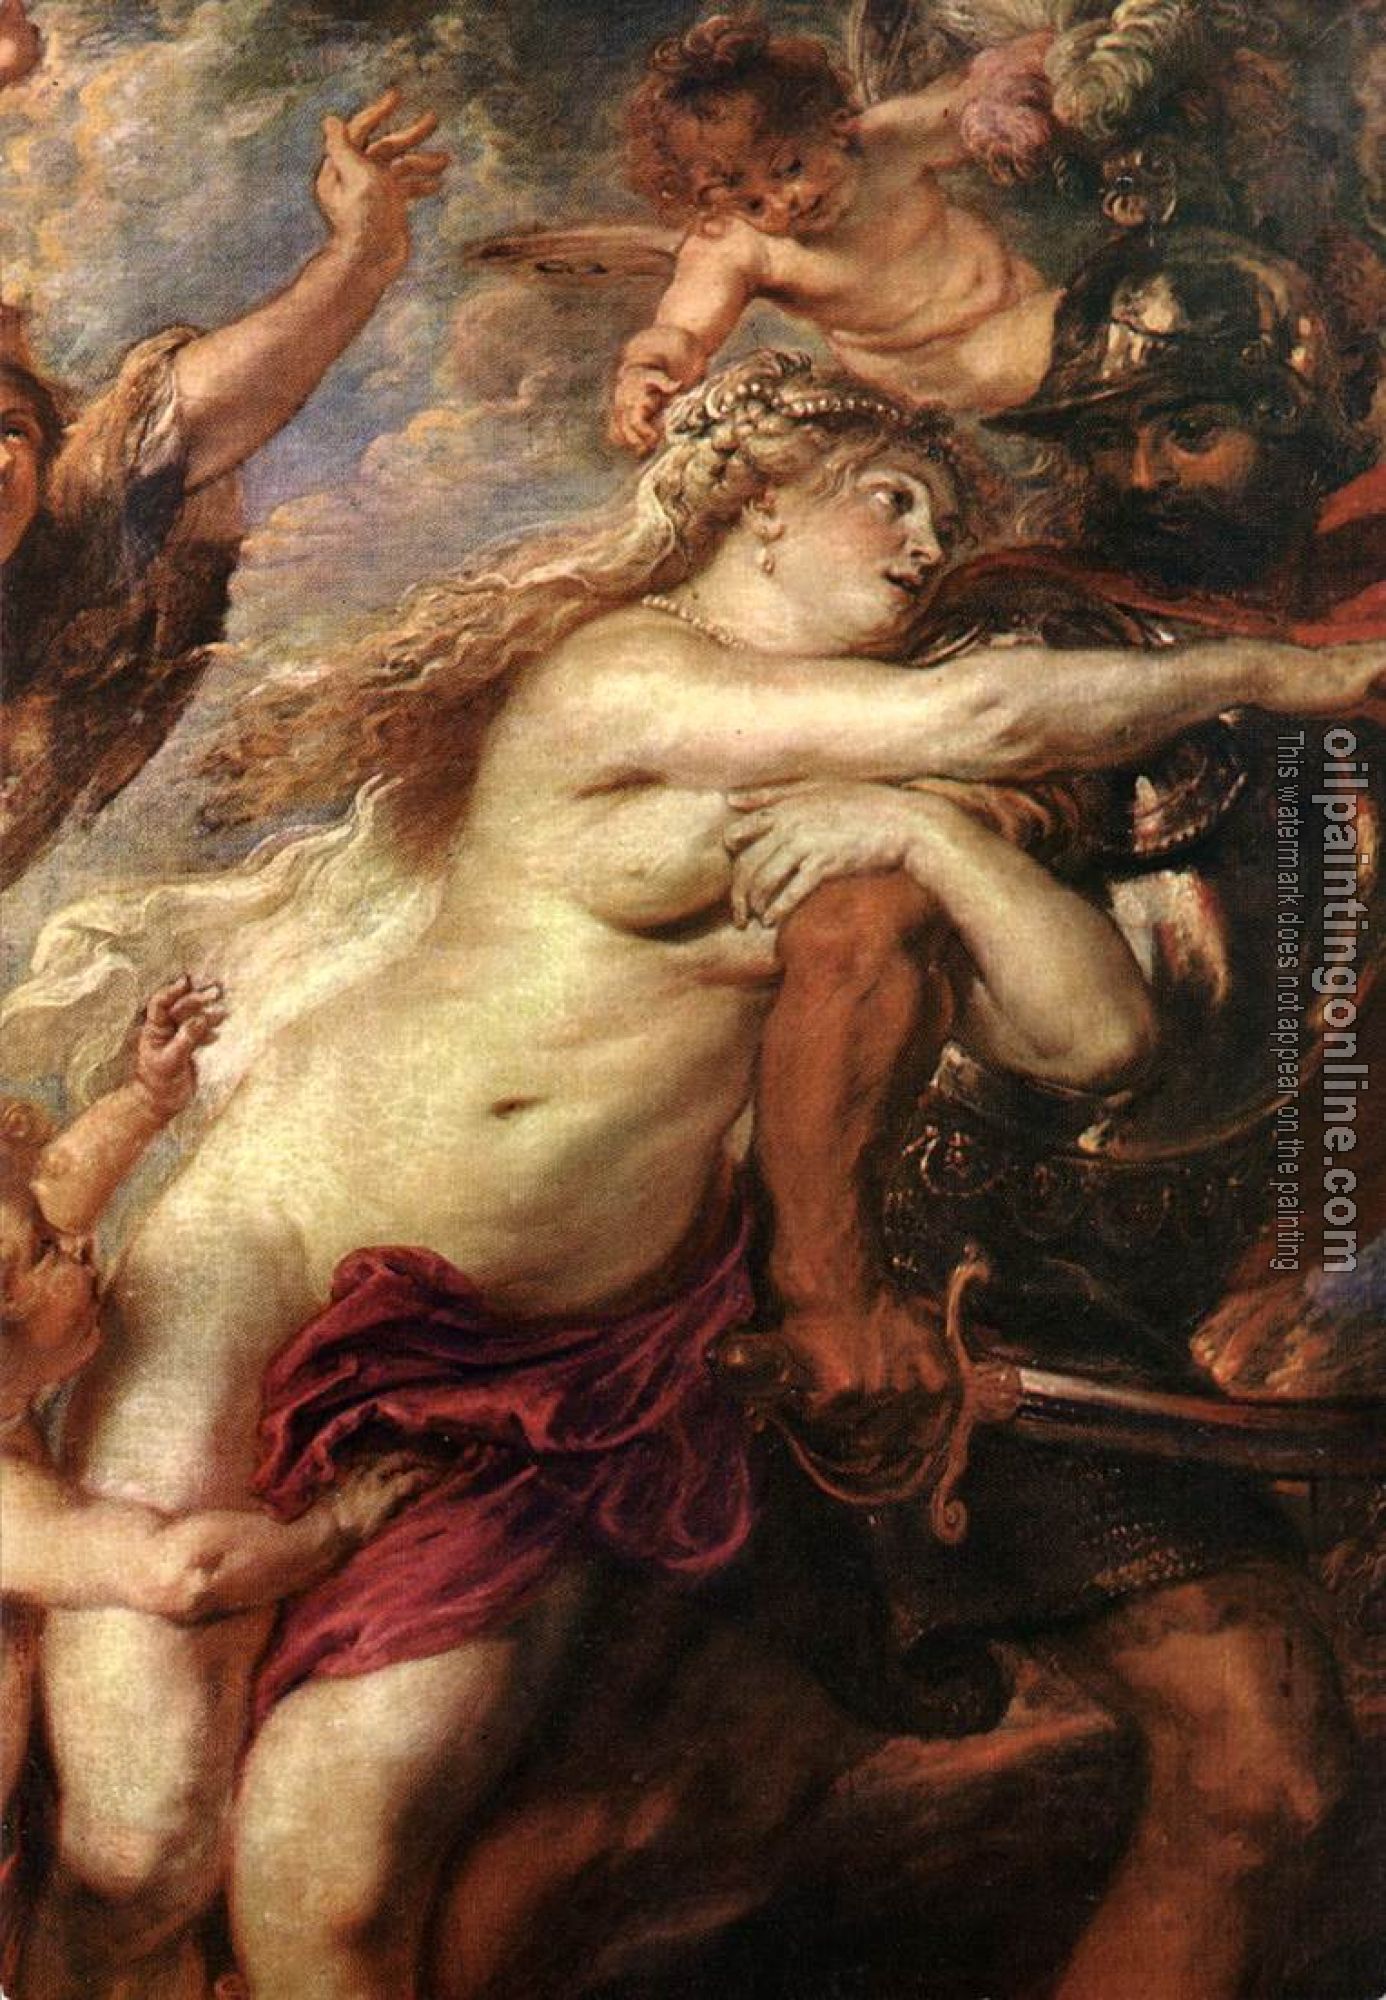 Rubens, Peter Paul - The Consequences of War